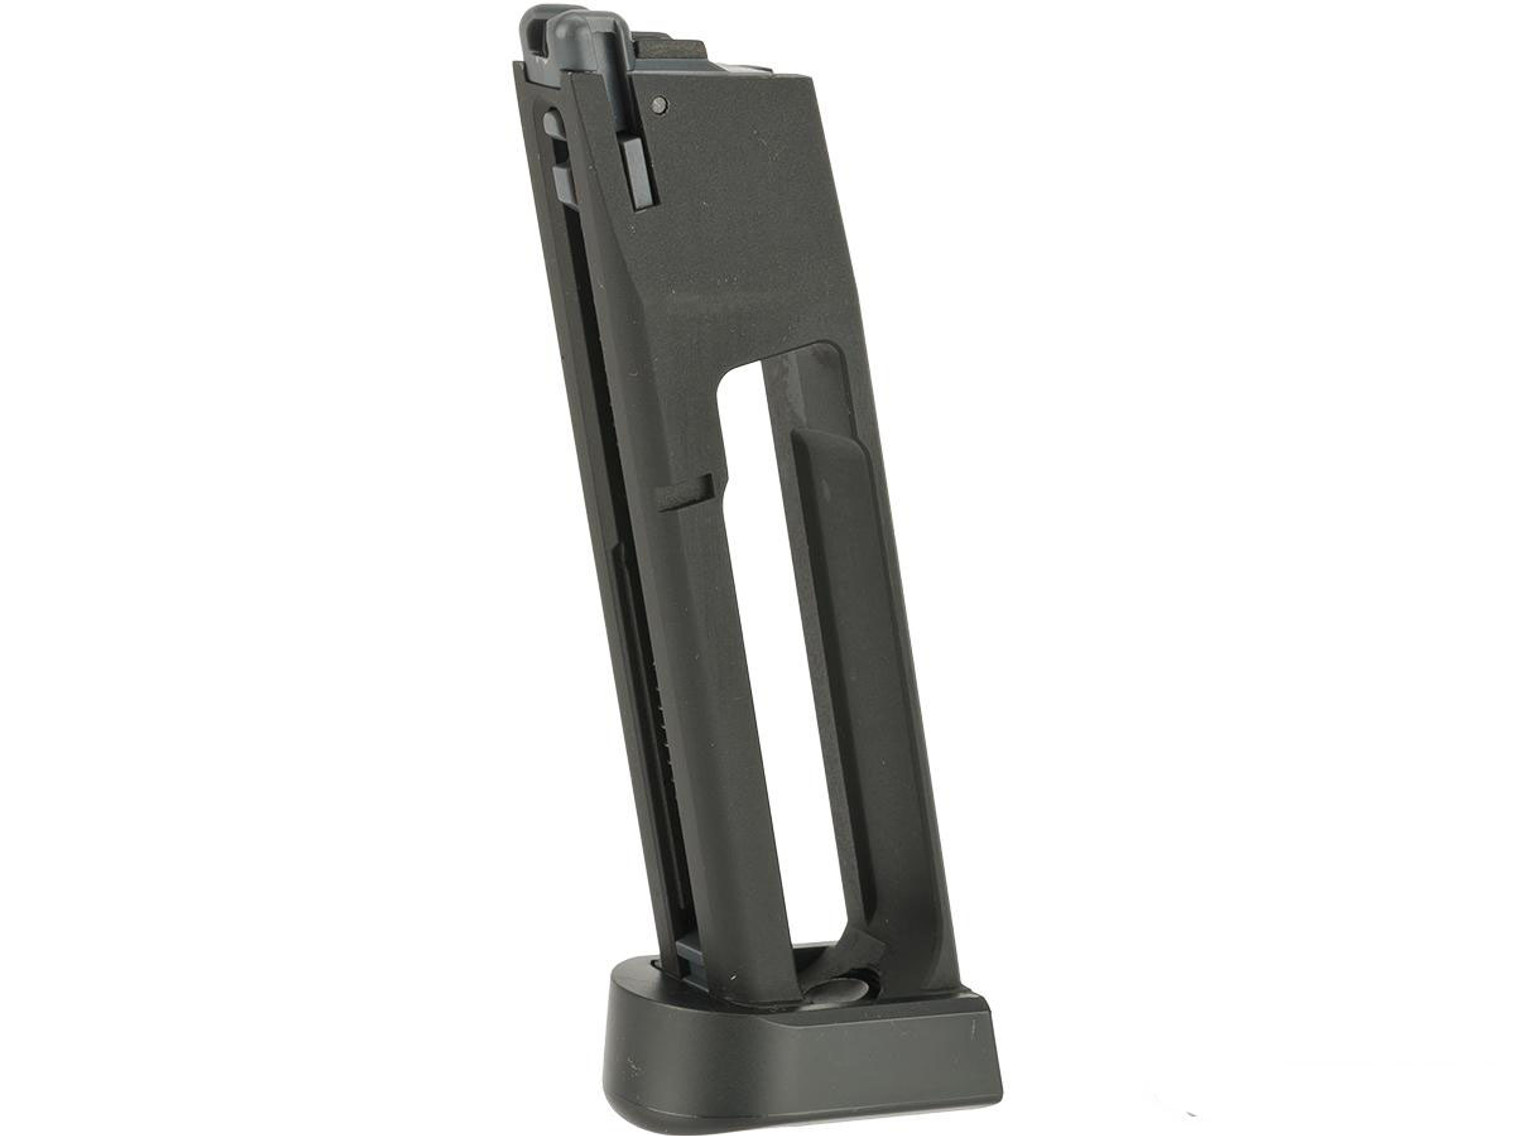 ASG CO2 Magazine for X9 Classic 4.5mm Air Pistol